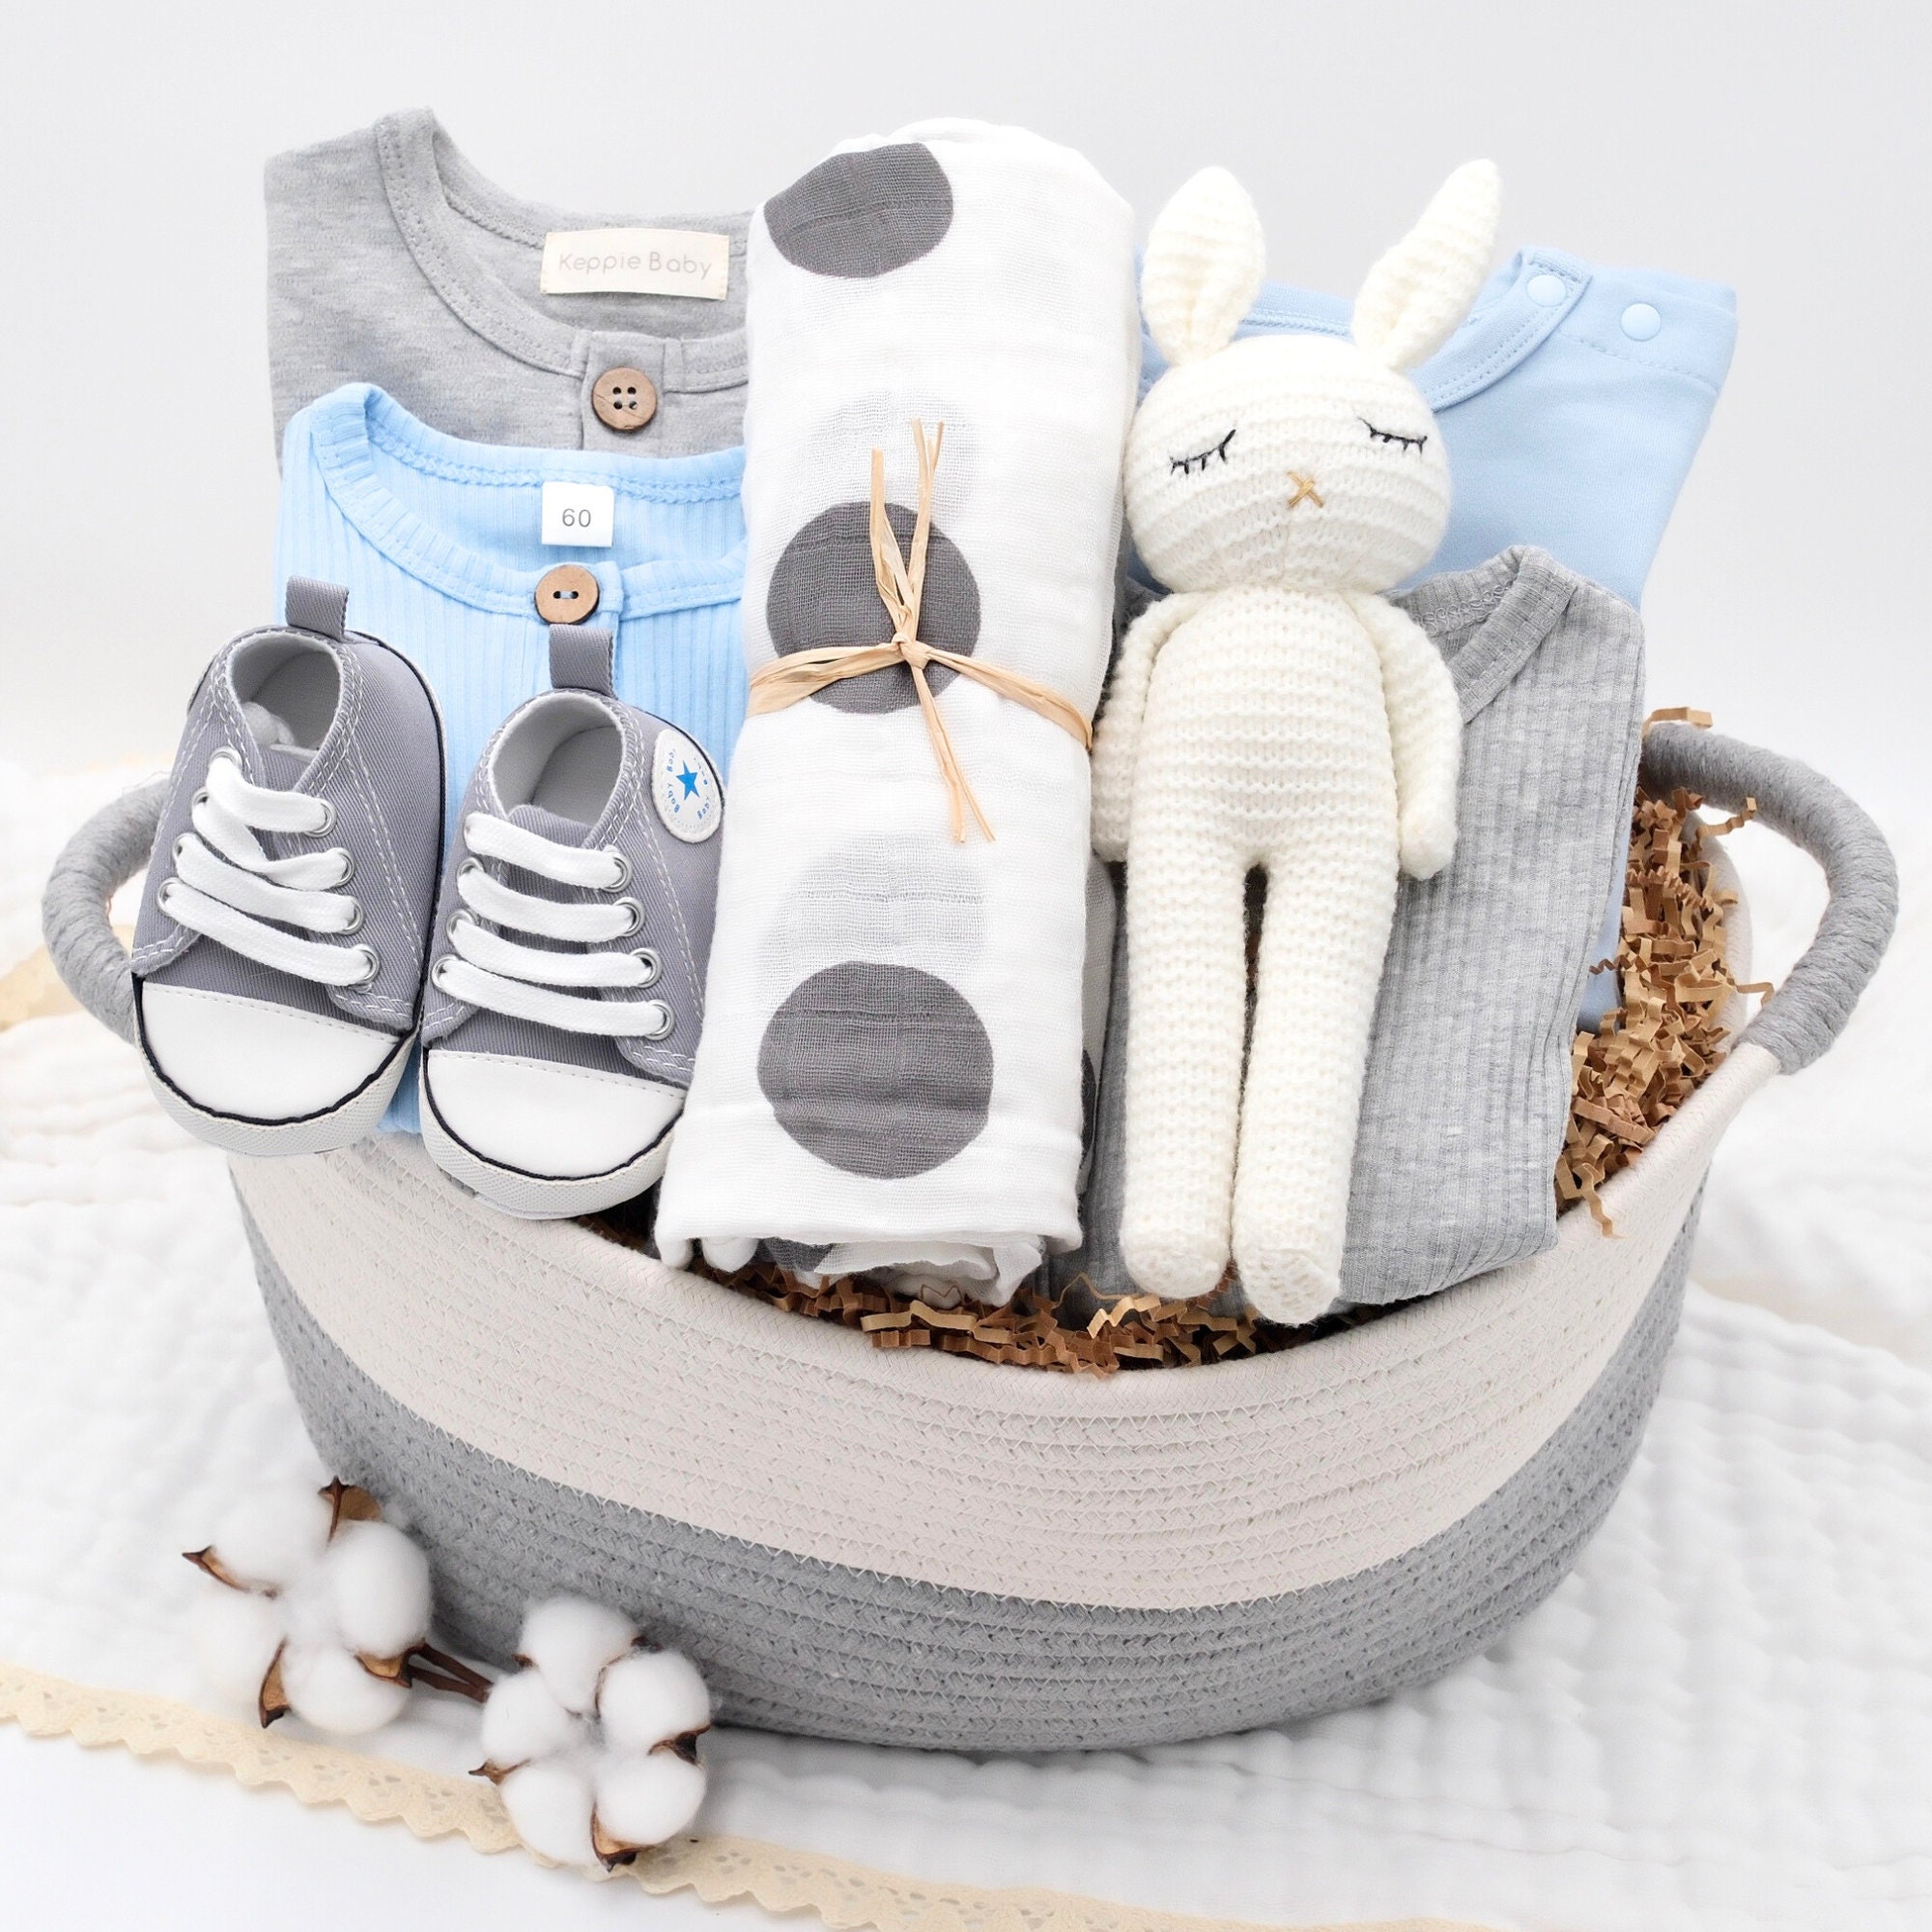 Baby Shower Gifts for Boys Girls, Baby Gifts Basket Newborn Blanket Rattle  Toys Keepsake Pacifier Clip Infant Bibs Socks New Parent Decision Coin  Greeting Card, Baby Gift Set Gender Reveal Essential 